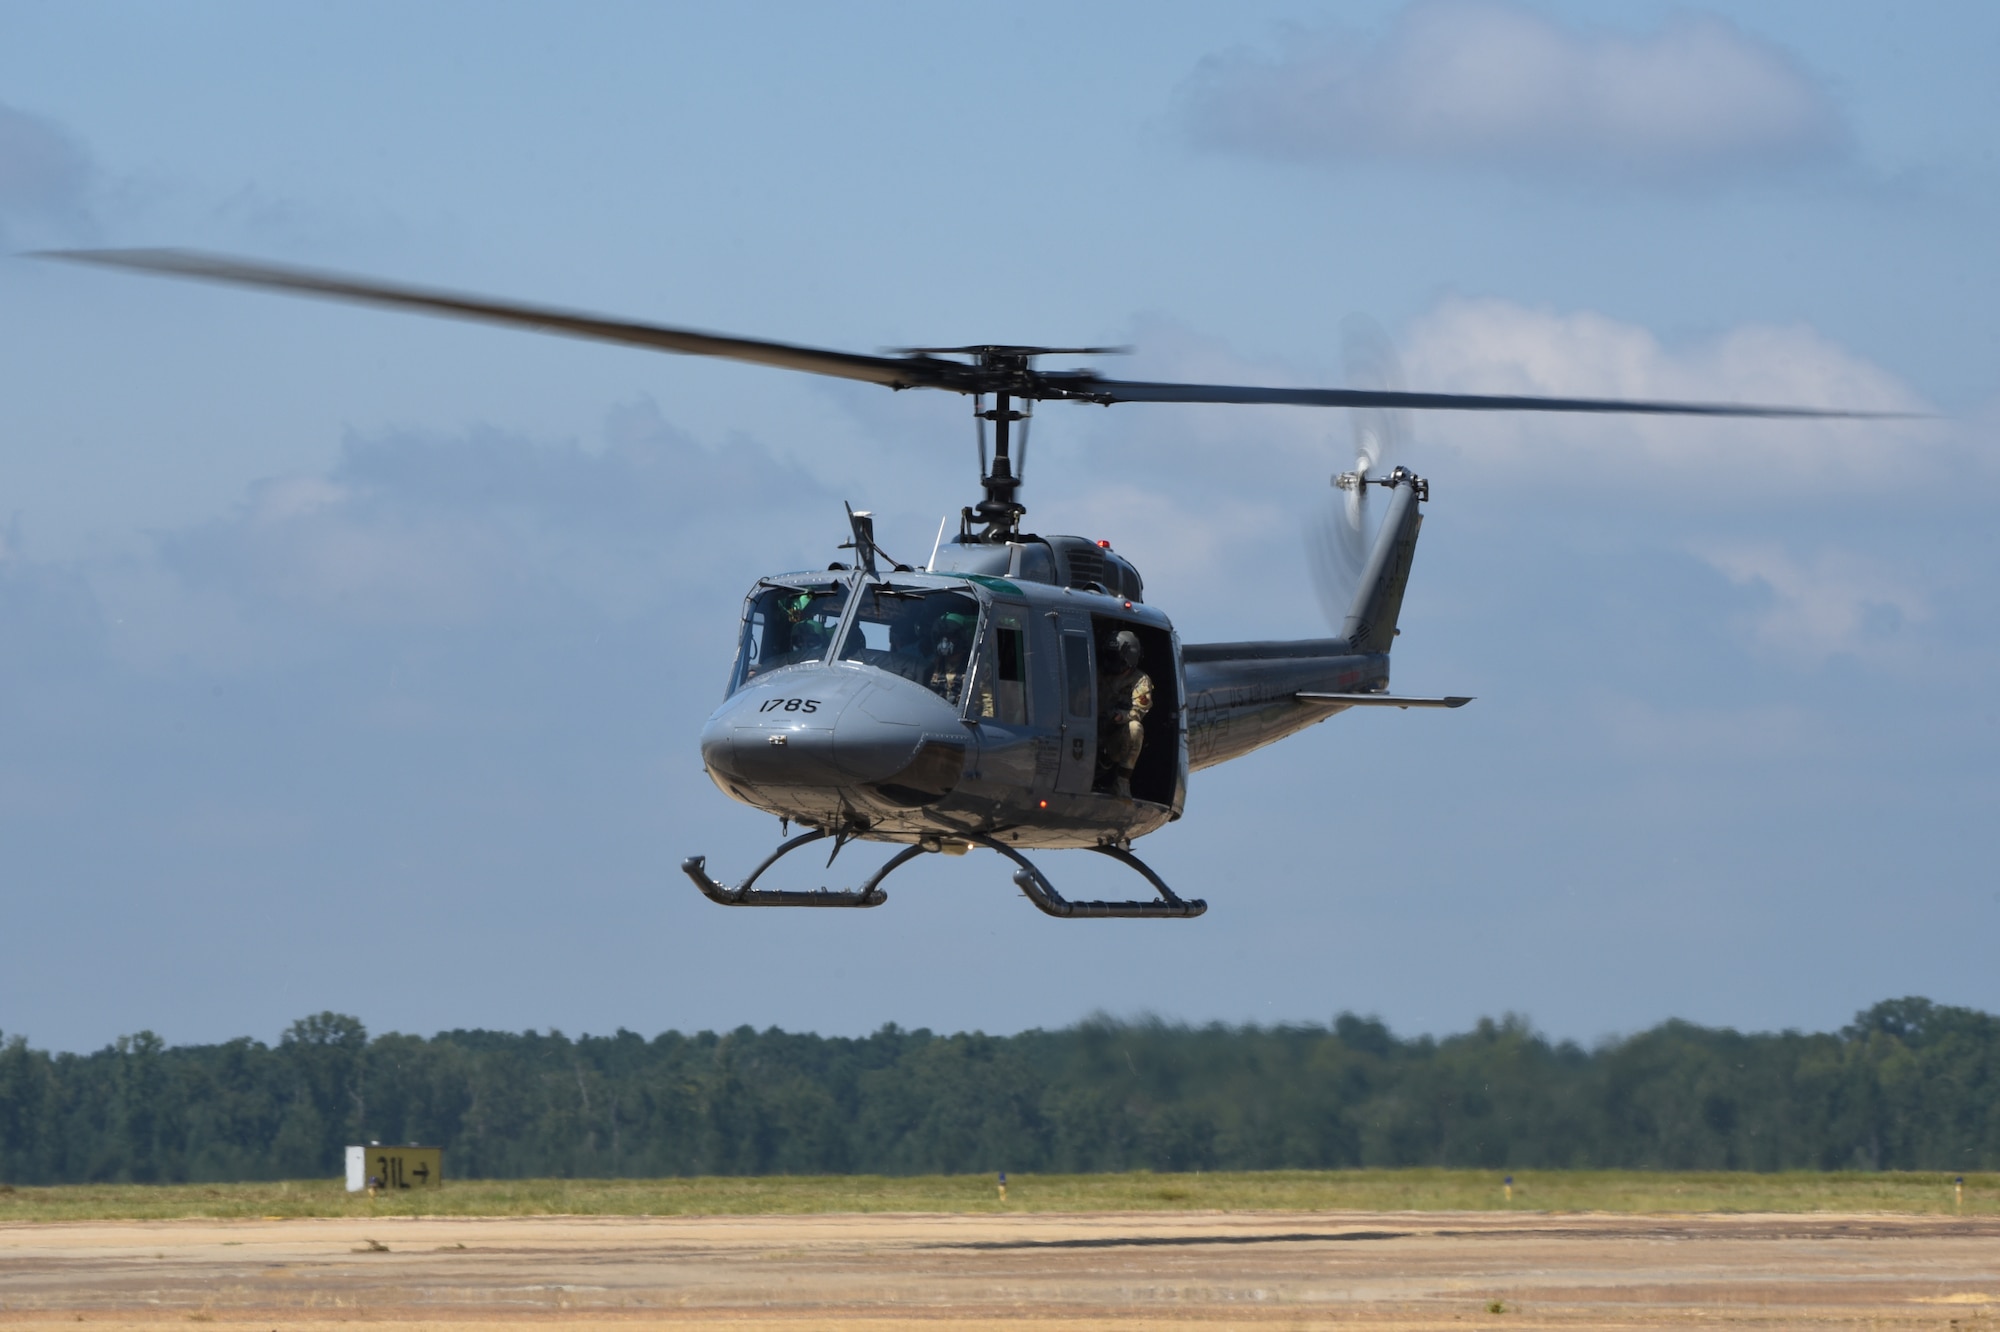 Airmen assigned to the 23rd Flying Training Squadron at Fort Rucker, Alabama prepare to land at Columbus Air Force Base, Mississippi on August 19 in a UH-1N Huey. A UH-1N can reach a speed of up to 149 mph. (U.S. Air Force photo by Airman 1st Class Davis Donaldson)